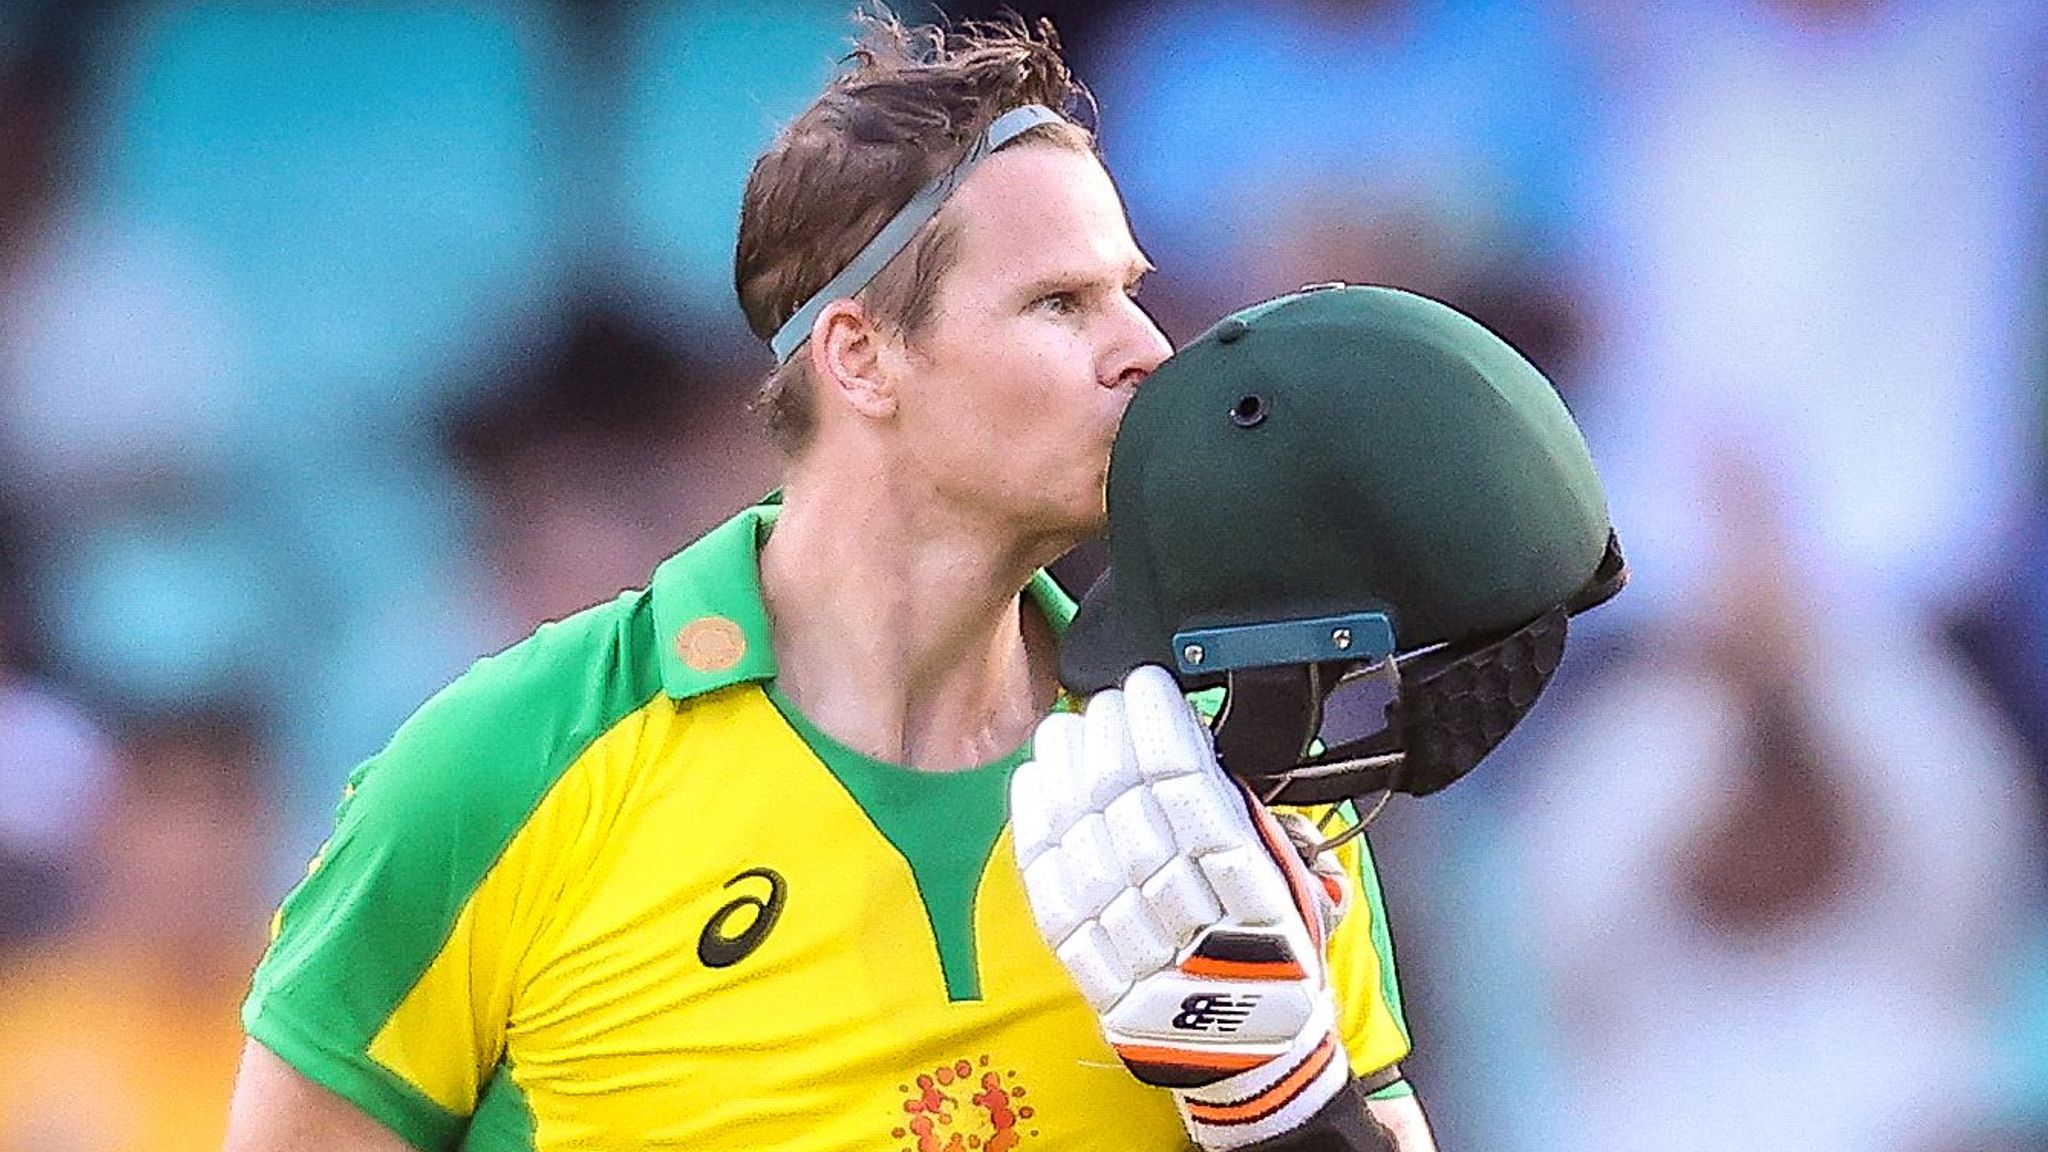 Steve Smith scores 62-ball hundred as Australia beat India in first one-day international in Sydney | Cricket News | Sky Sports